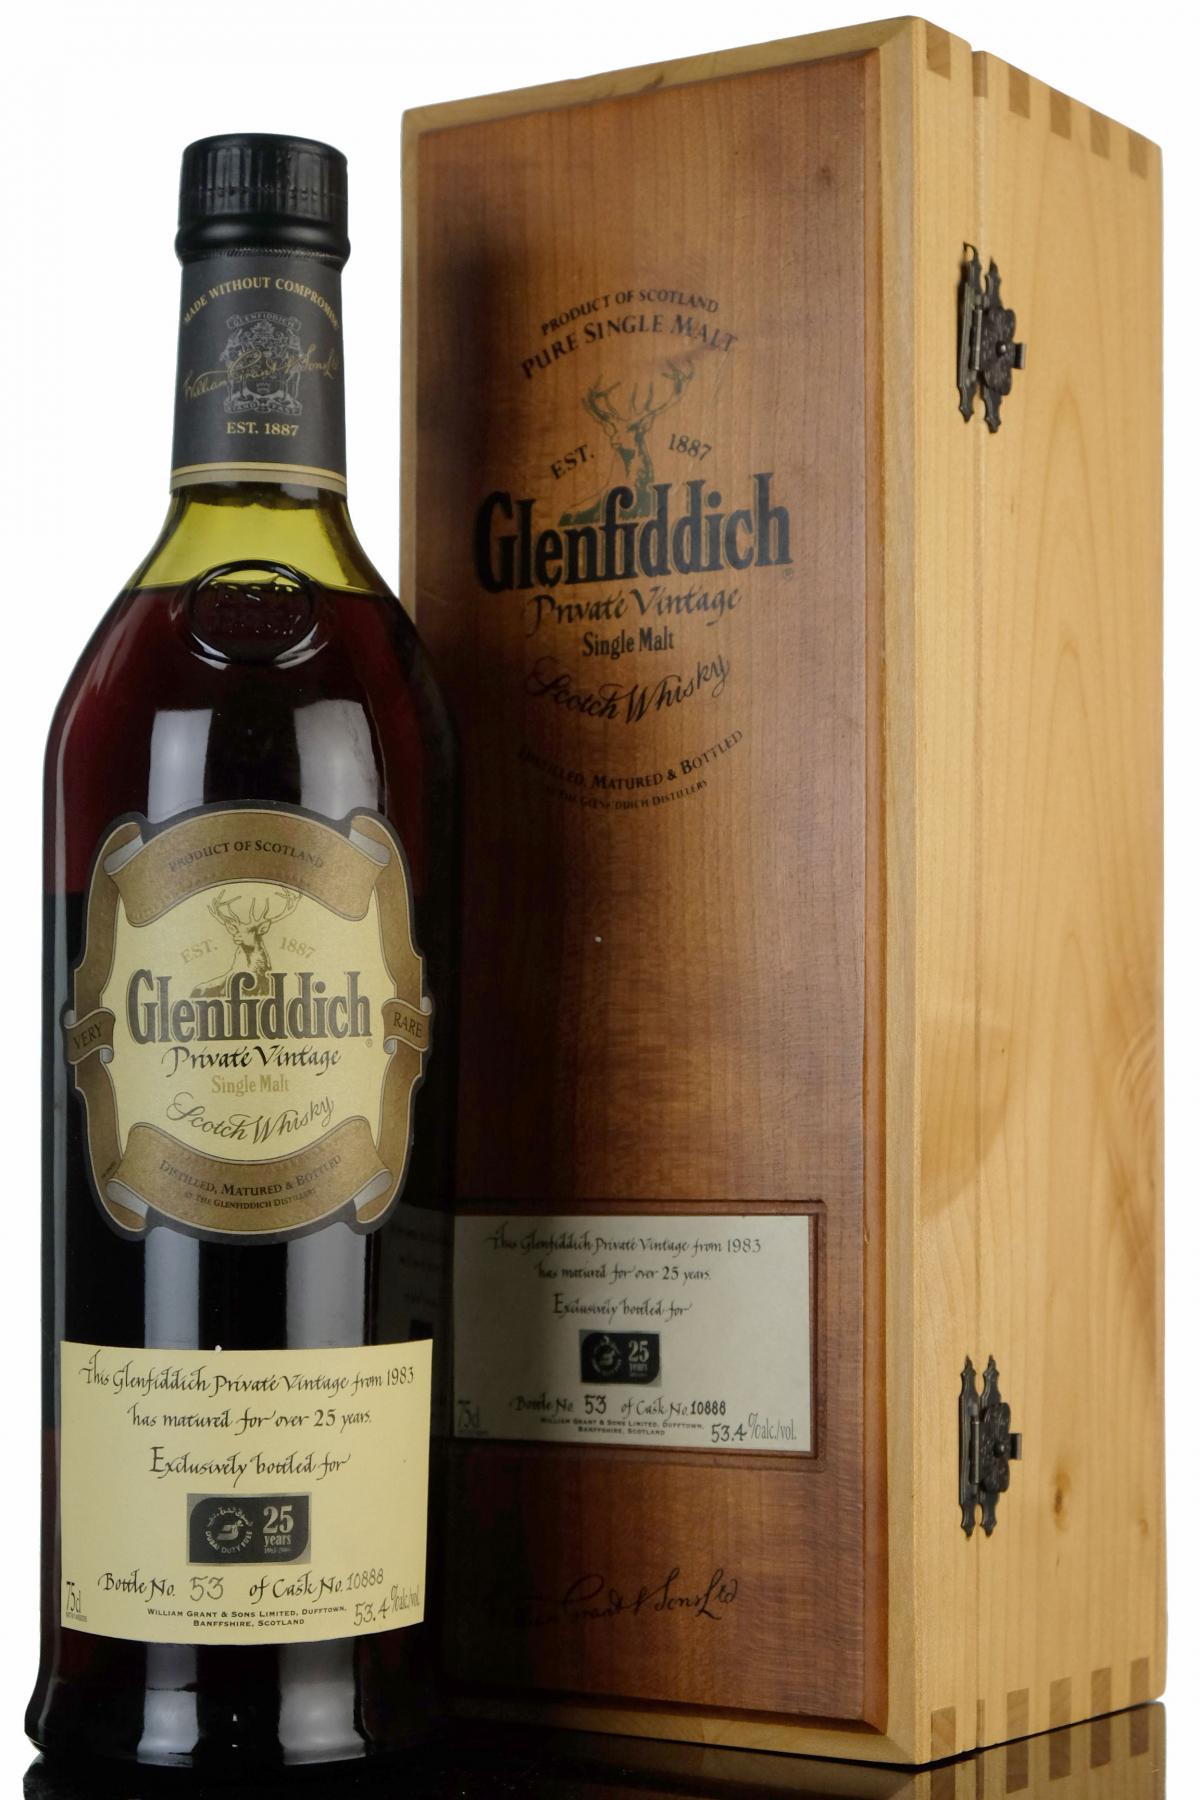 Glenfiddich 1983 - 25 Year Old - Private Vintage - Single Cask 10888